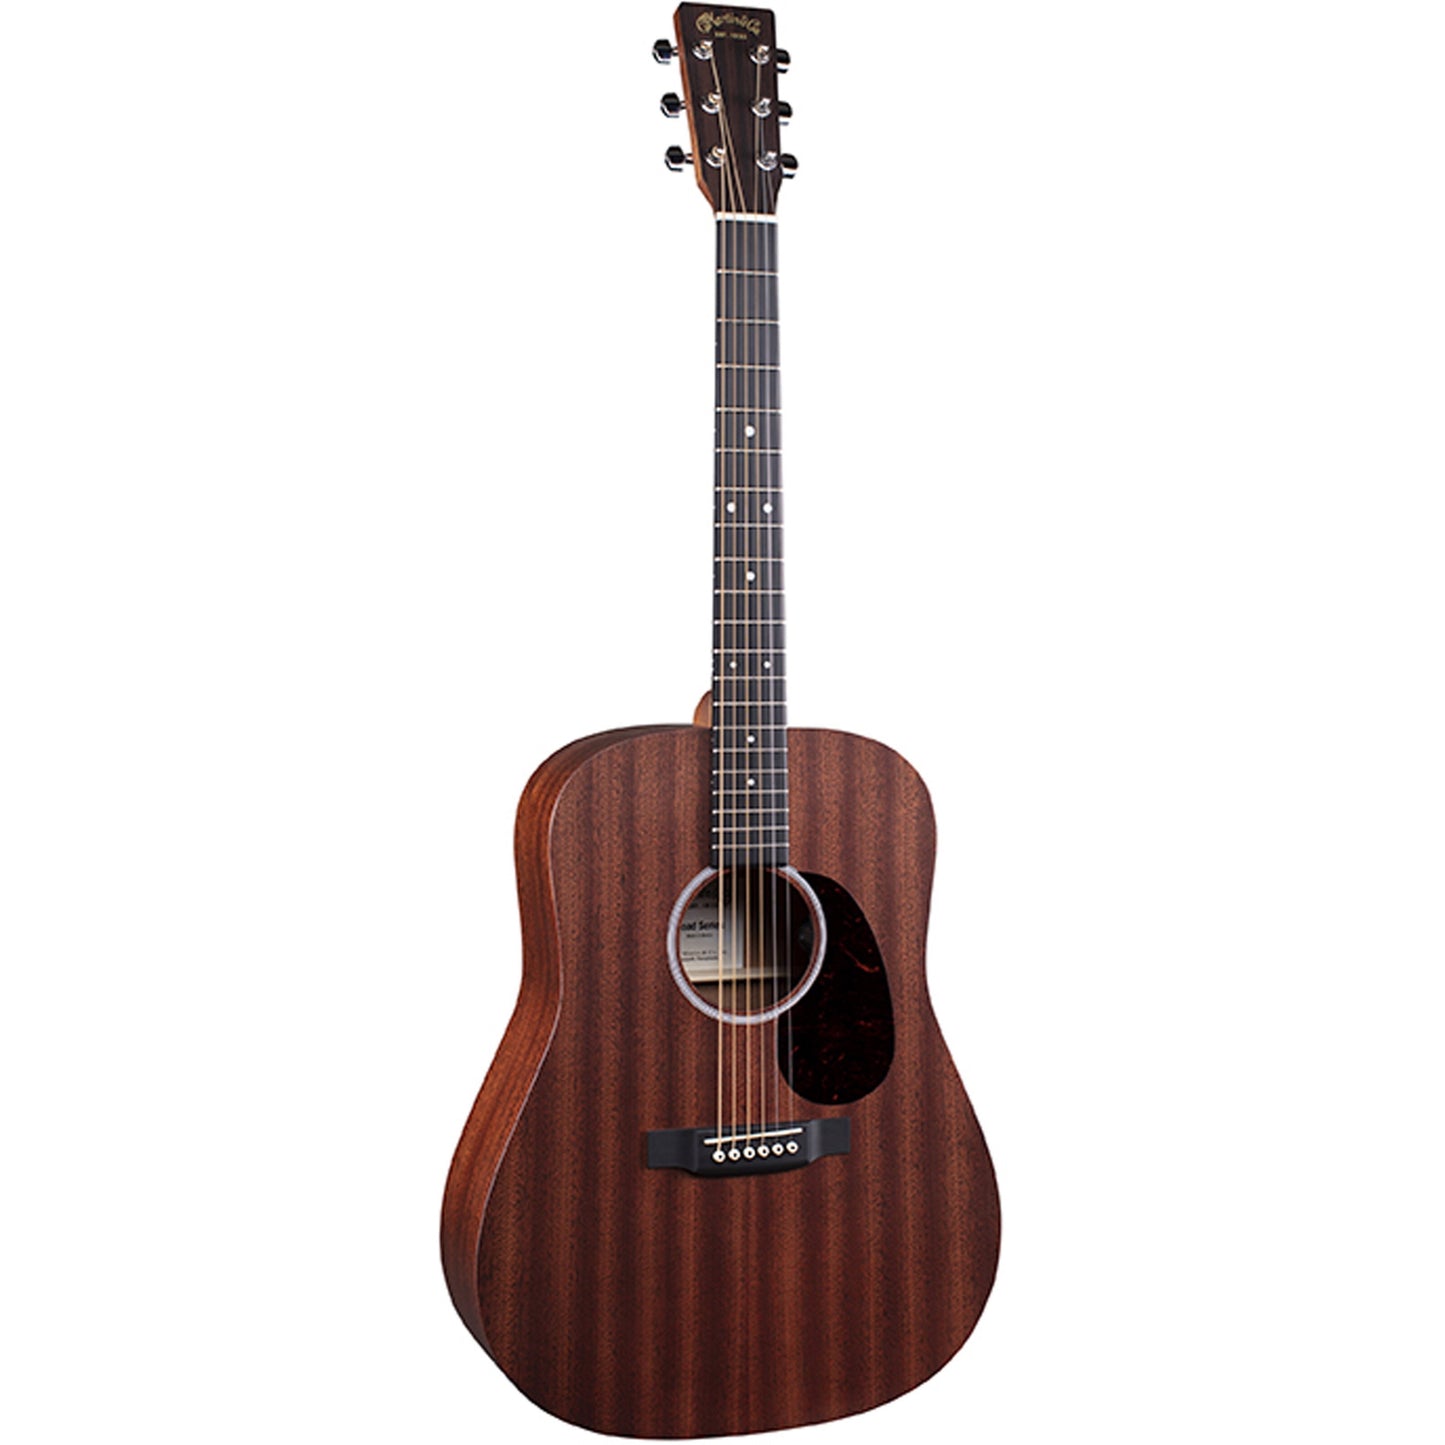 Martin D-10E Road Series Acoustic-Electric Guitar (with Soft Case), Natural, Sapele Top